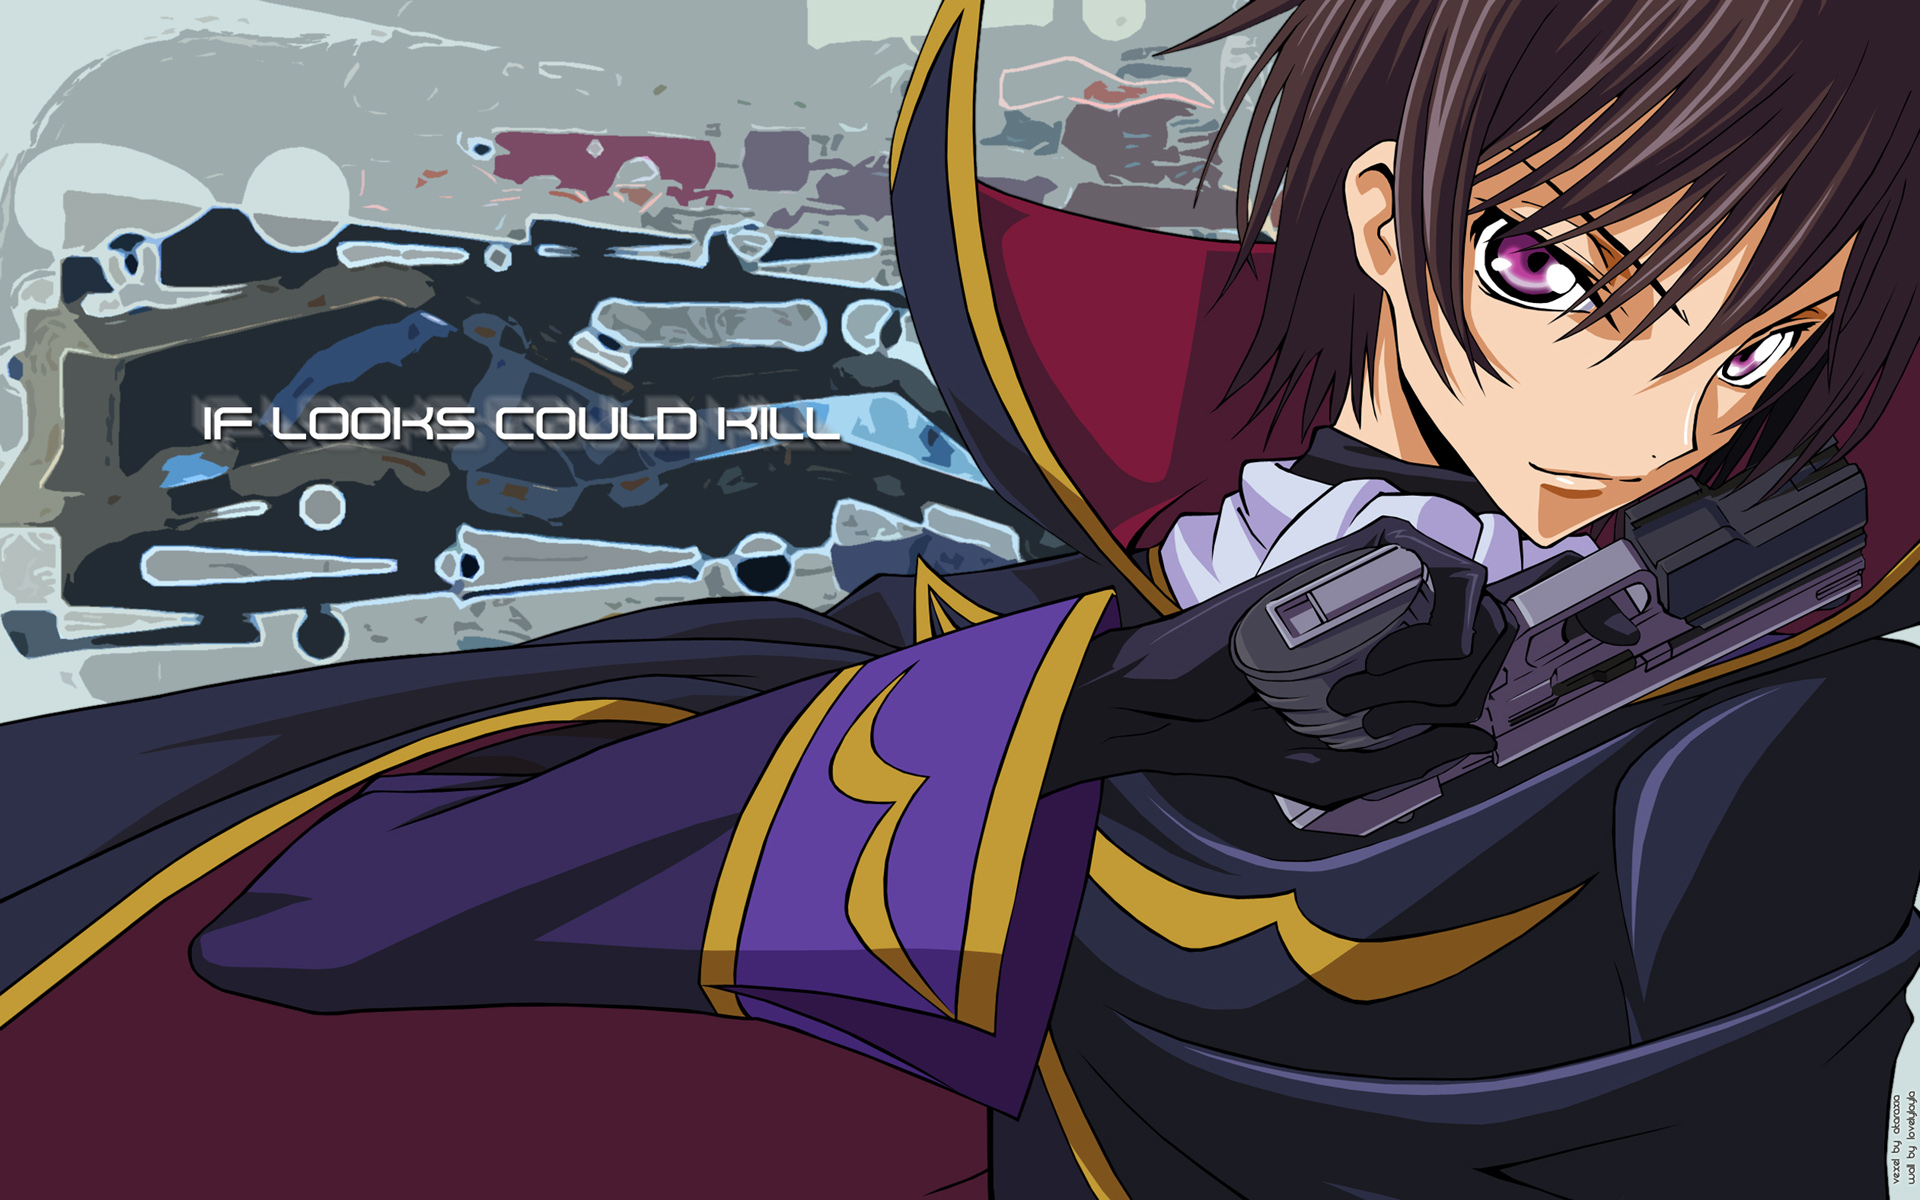 Download Anime Profile Picture Lelouch Lamperouge Wallpaper